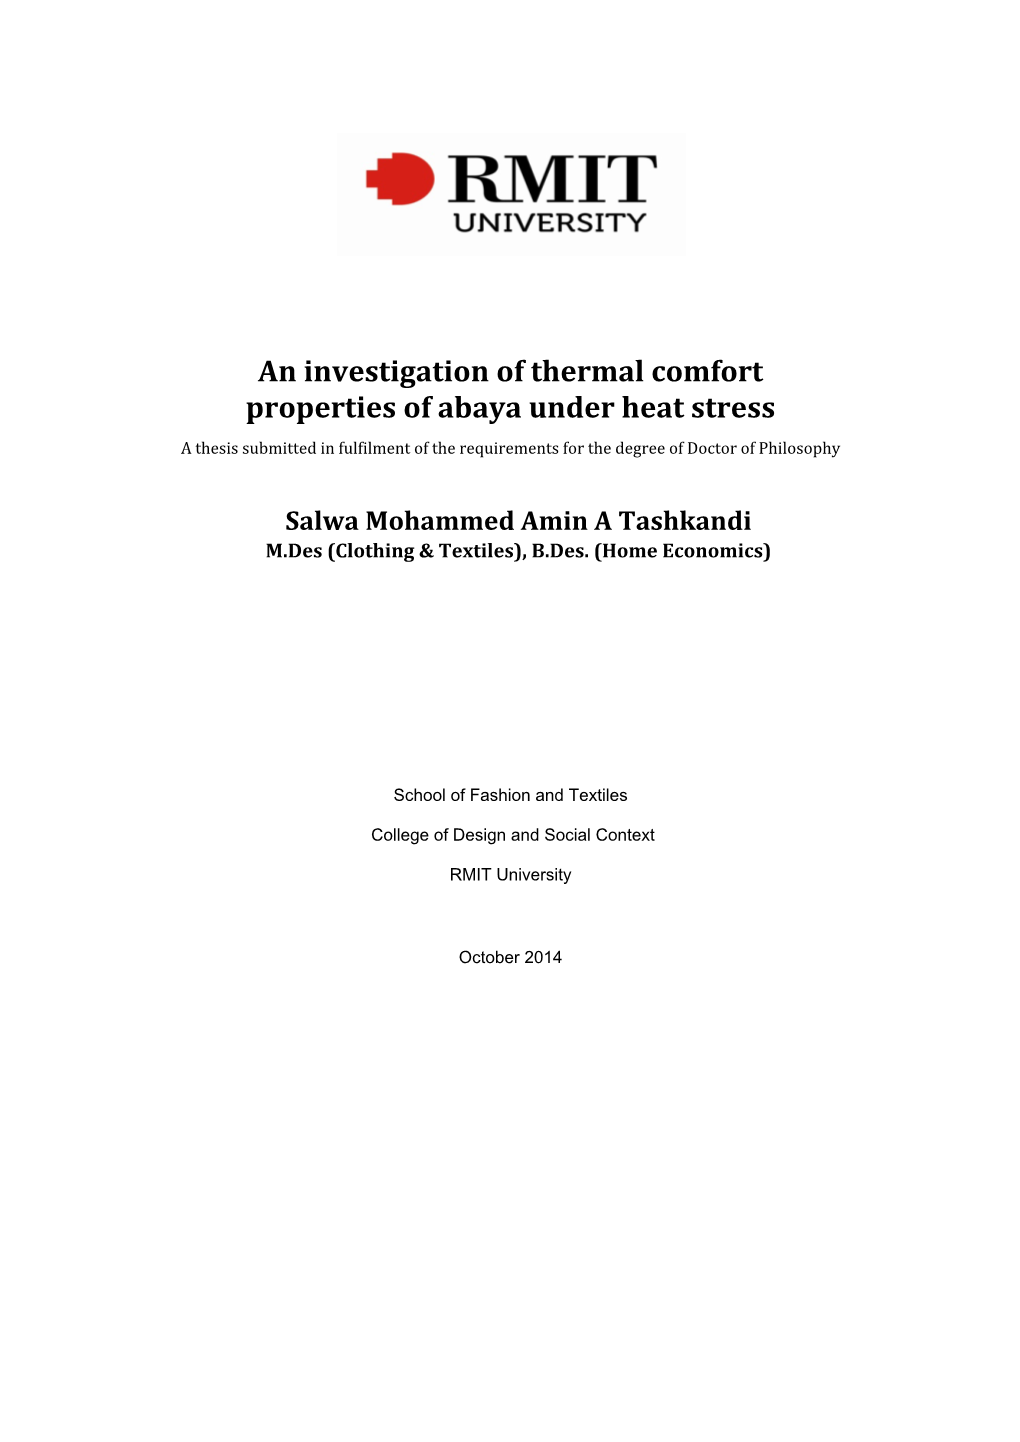 An Investigation of Thermal Comfort Properties of Abaya Under Heat Stress a Thesis Submitted in Fulfilment of the Requirements for the Degree of Doctor of Philosophy